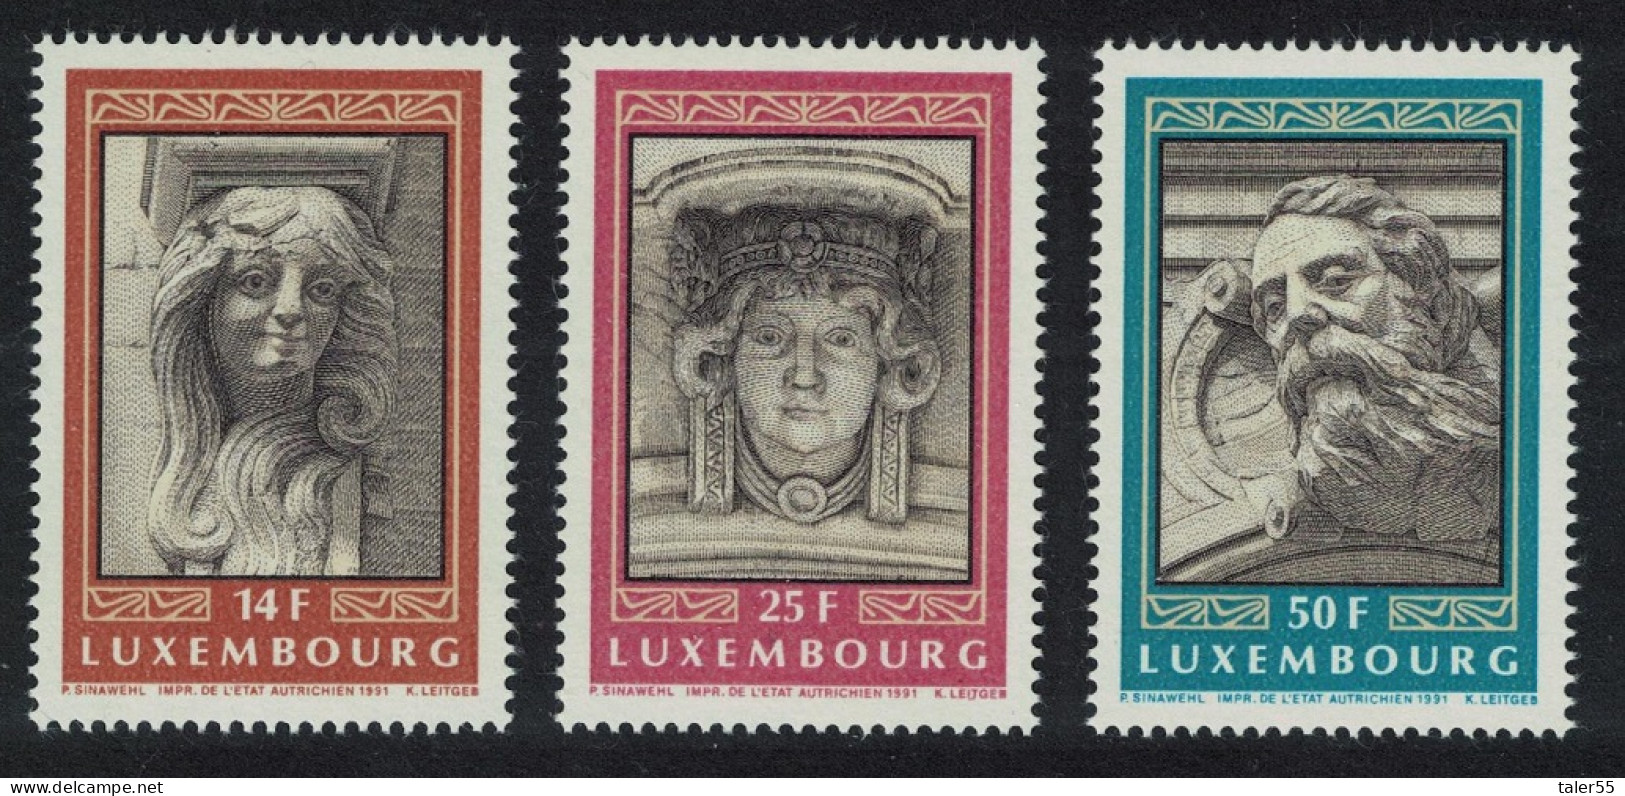 Luxembourg Mascarons Stone Faces On Buildings 3v 1991 MNH SG#1301-1303 MI#1277-1279 - Neufs